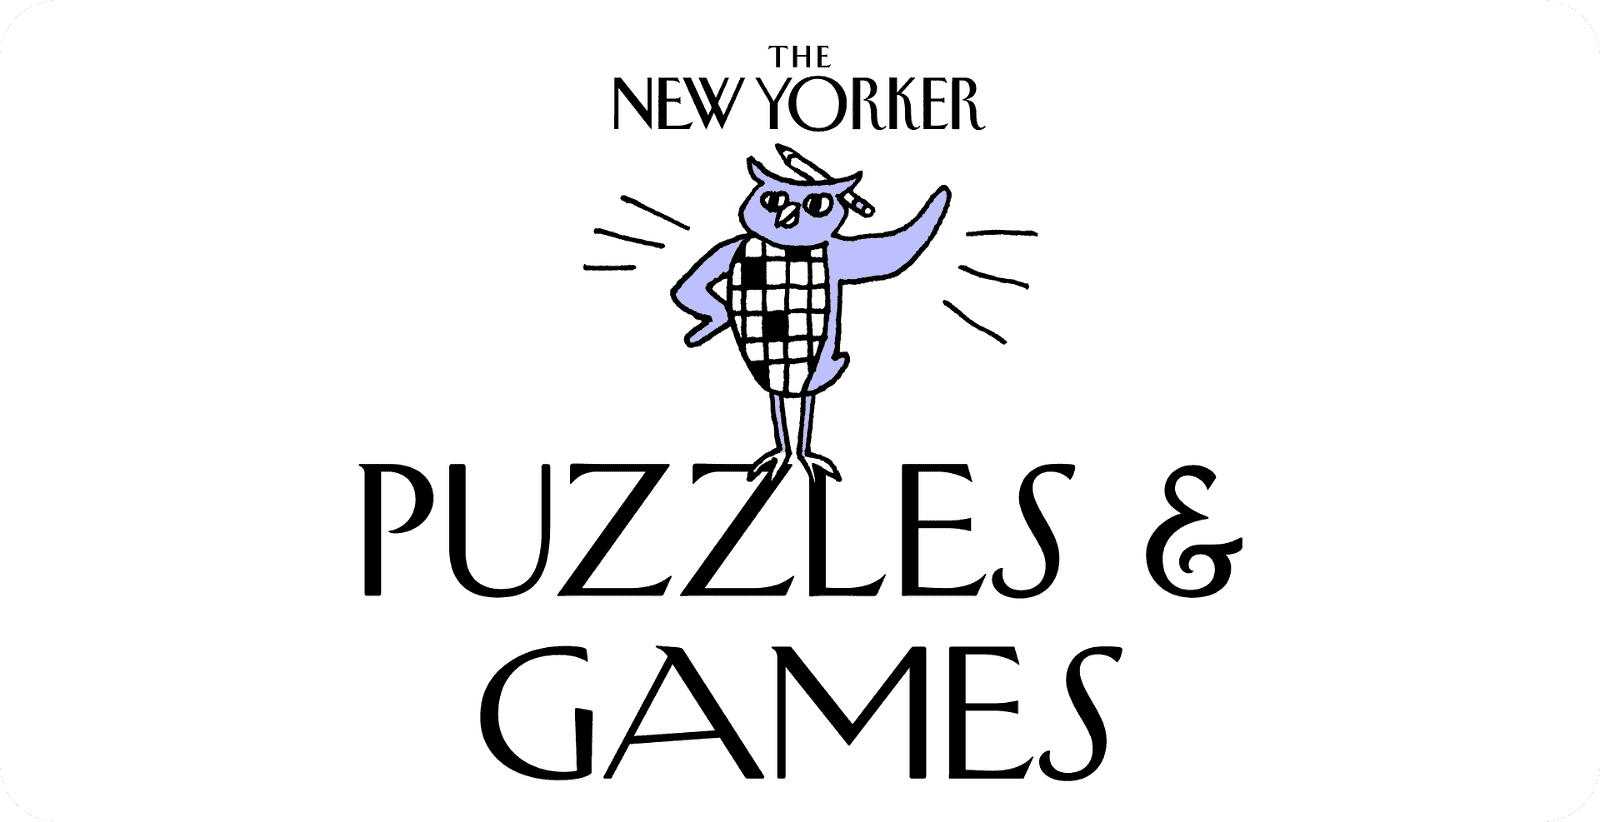 THE NEW YORKER | PUZZLES AND GAMES